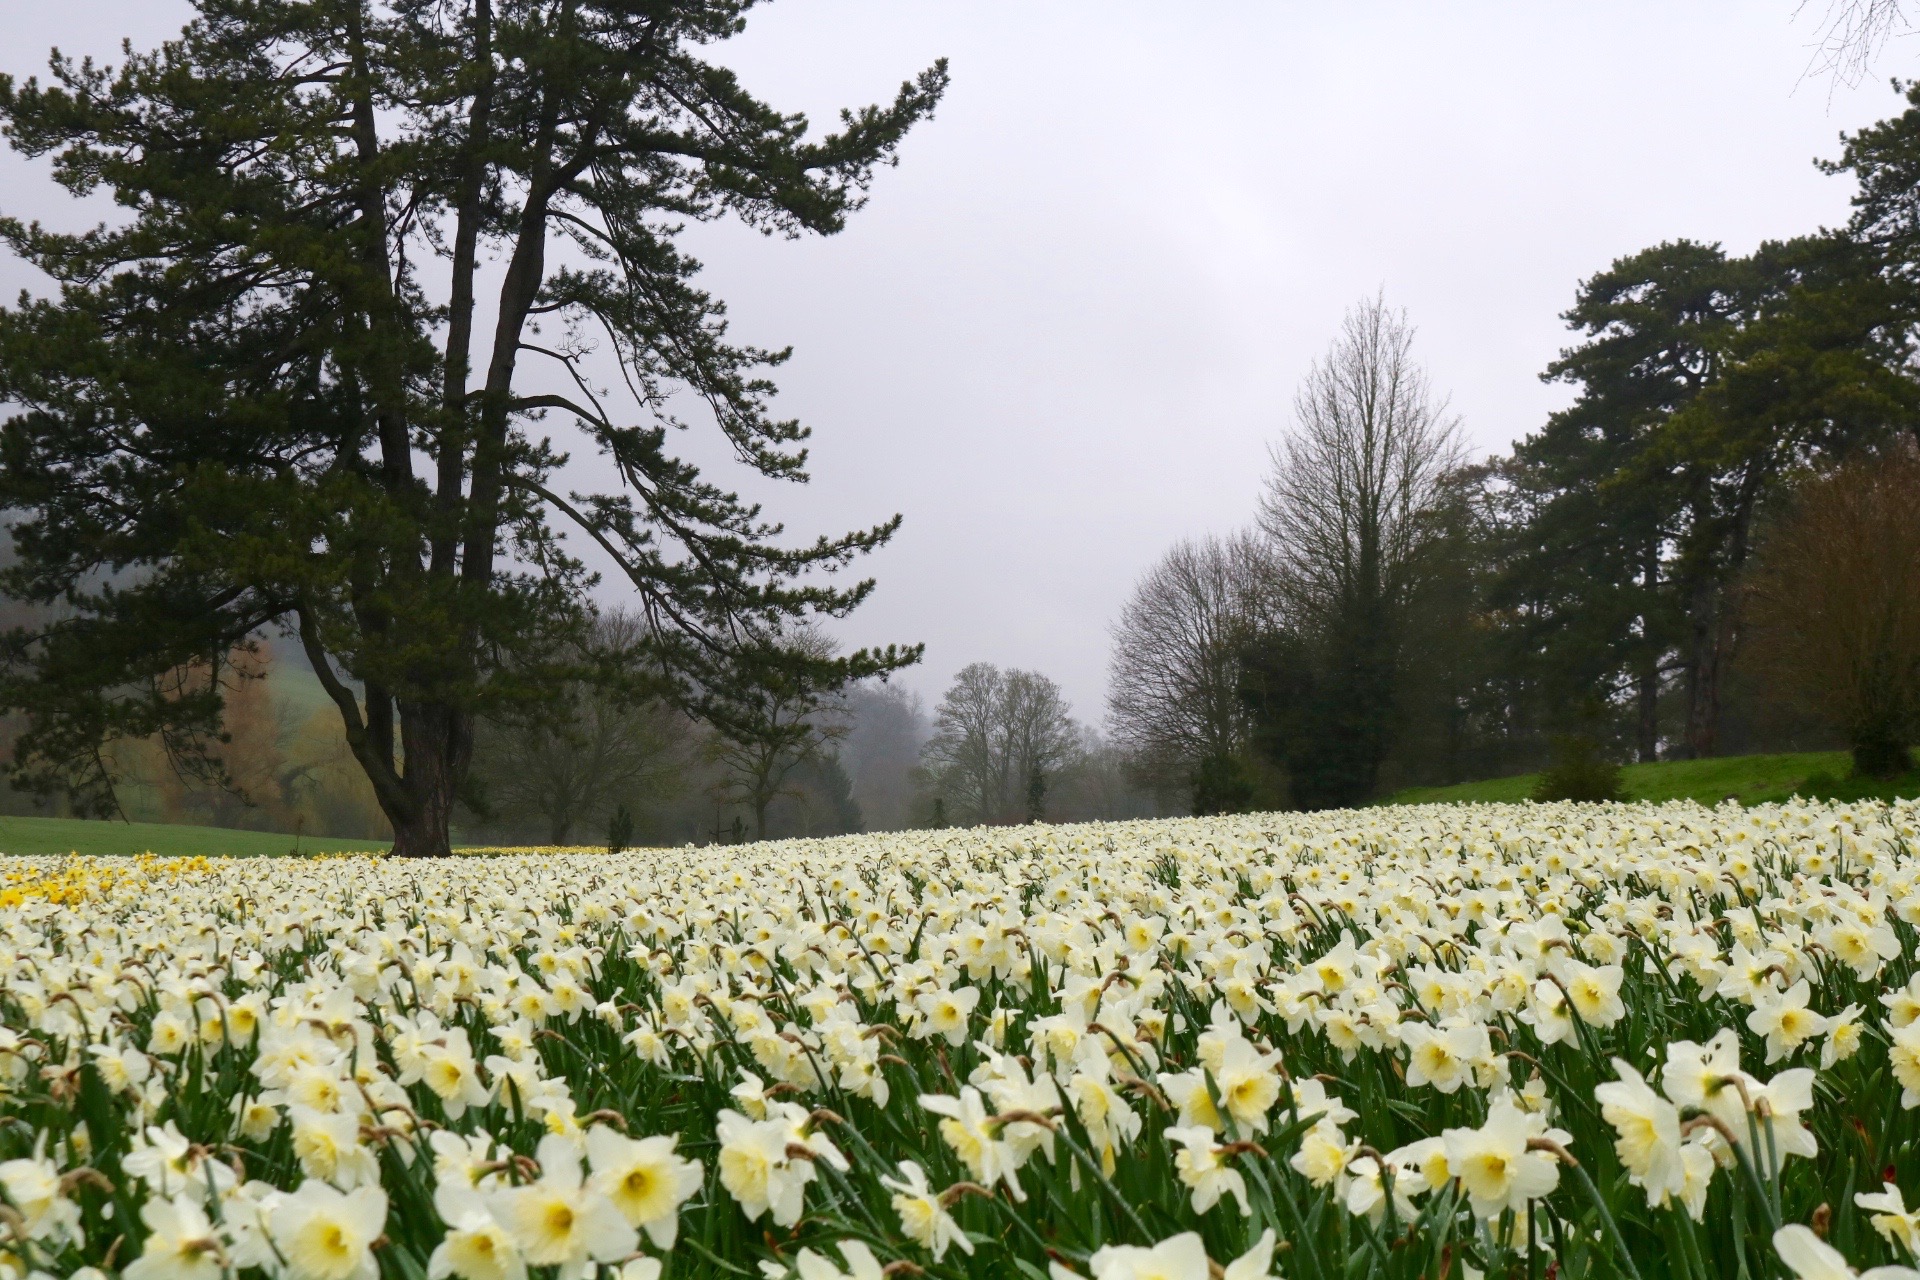 Swathes of pale daffodils at Hughenden Valley, High Wycomb